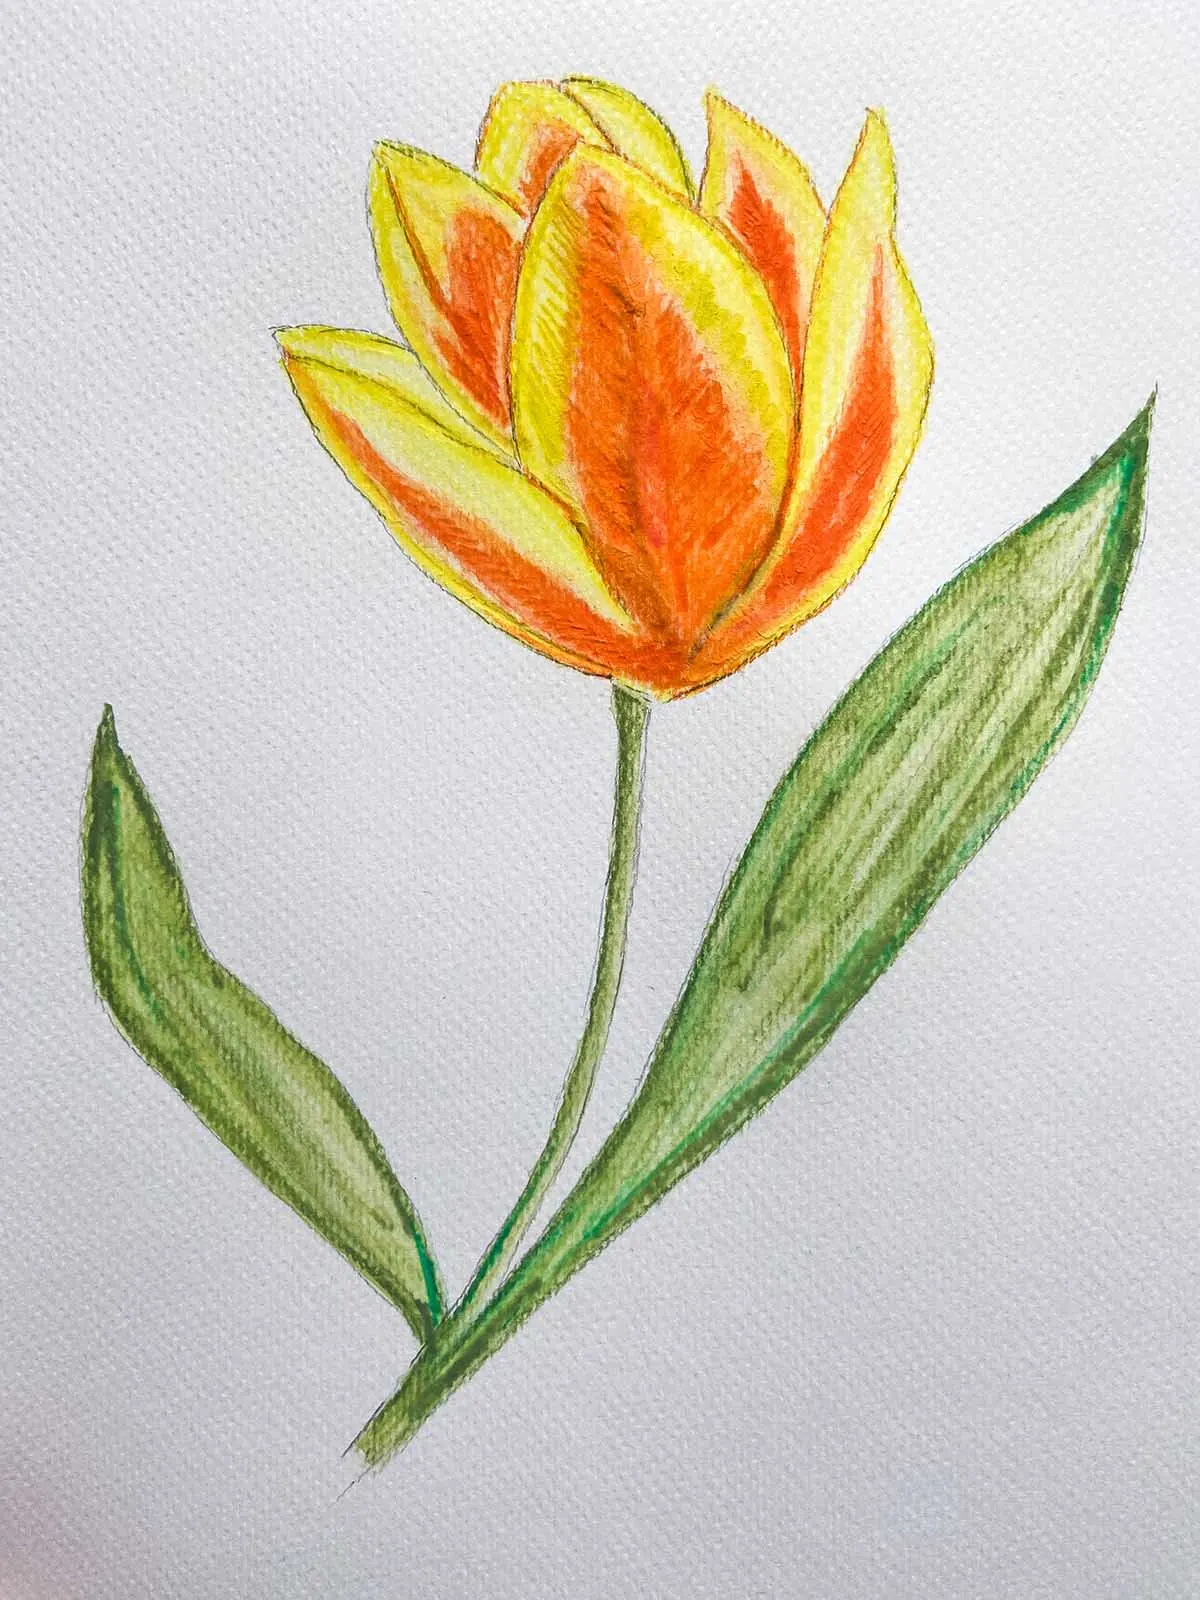 finished orange and yellow drawn tulip from tutorial